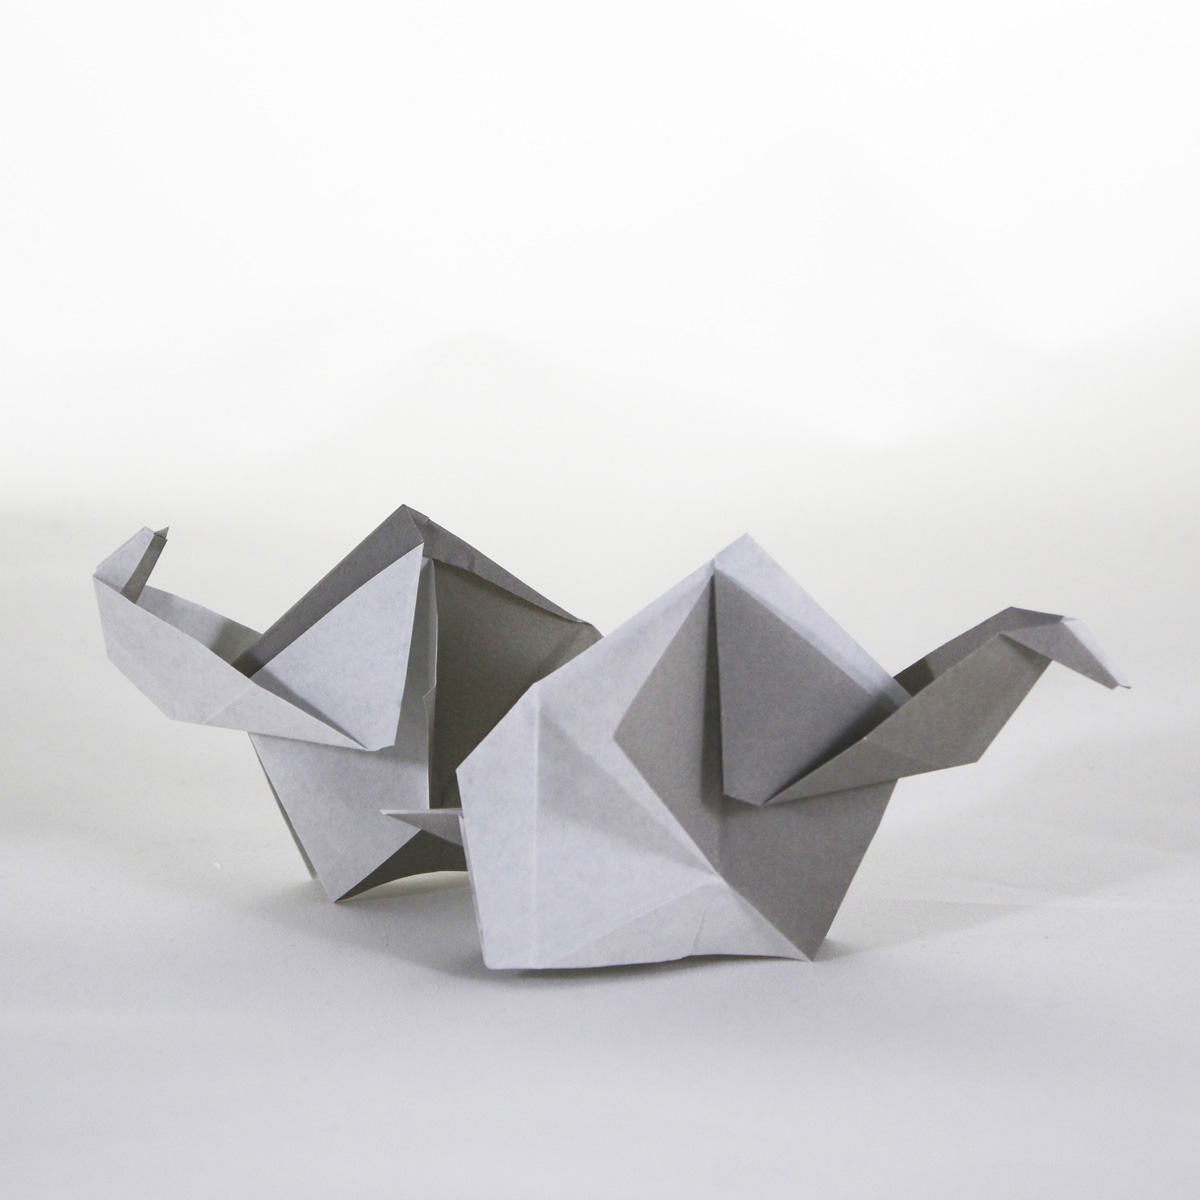 "Two-Tone" the Origamido Elephant, designed by Michael LaFosse and Richard Alexander